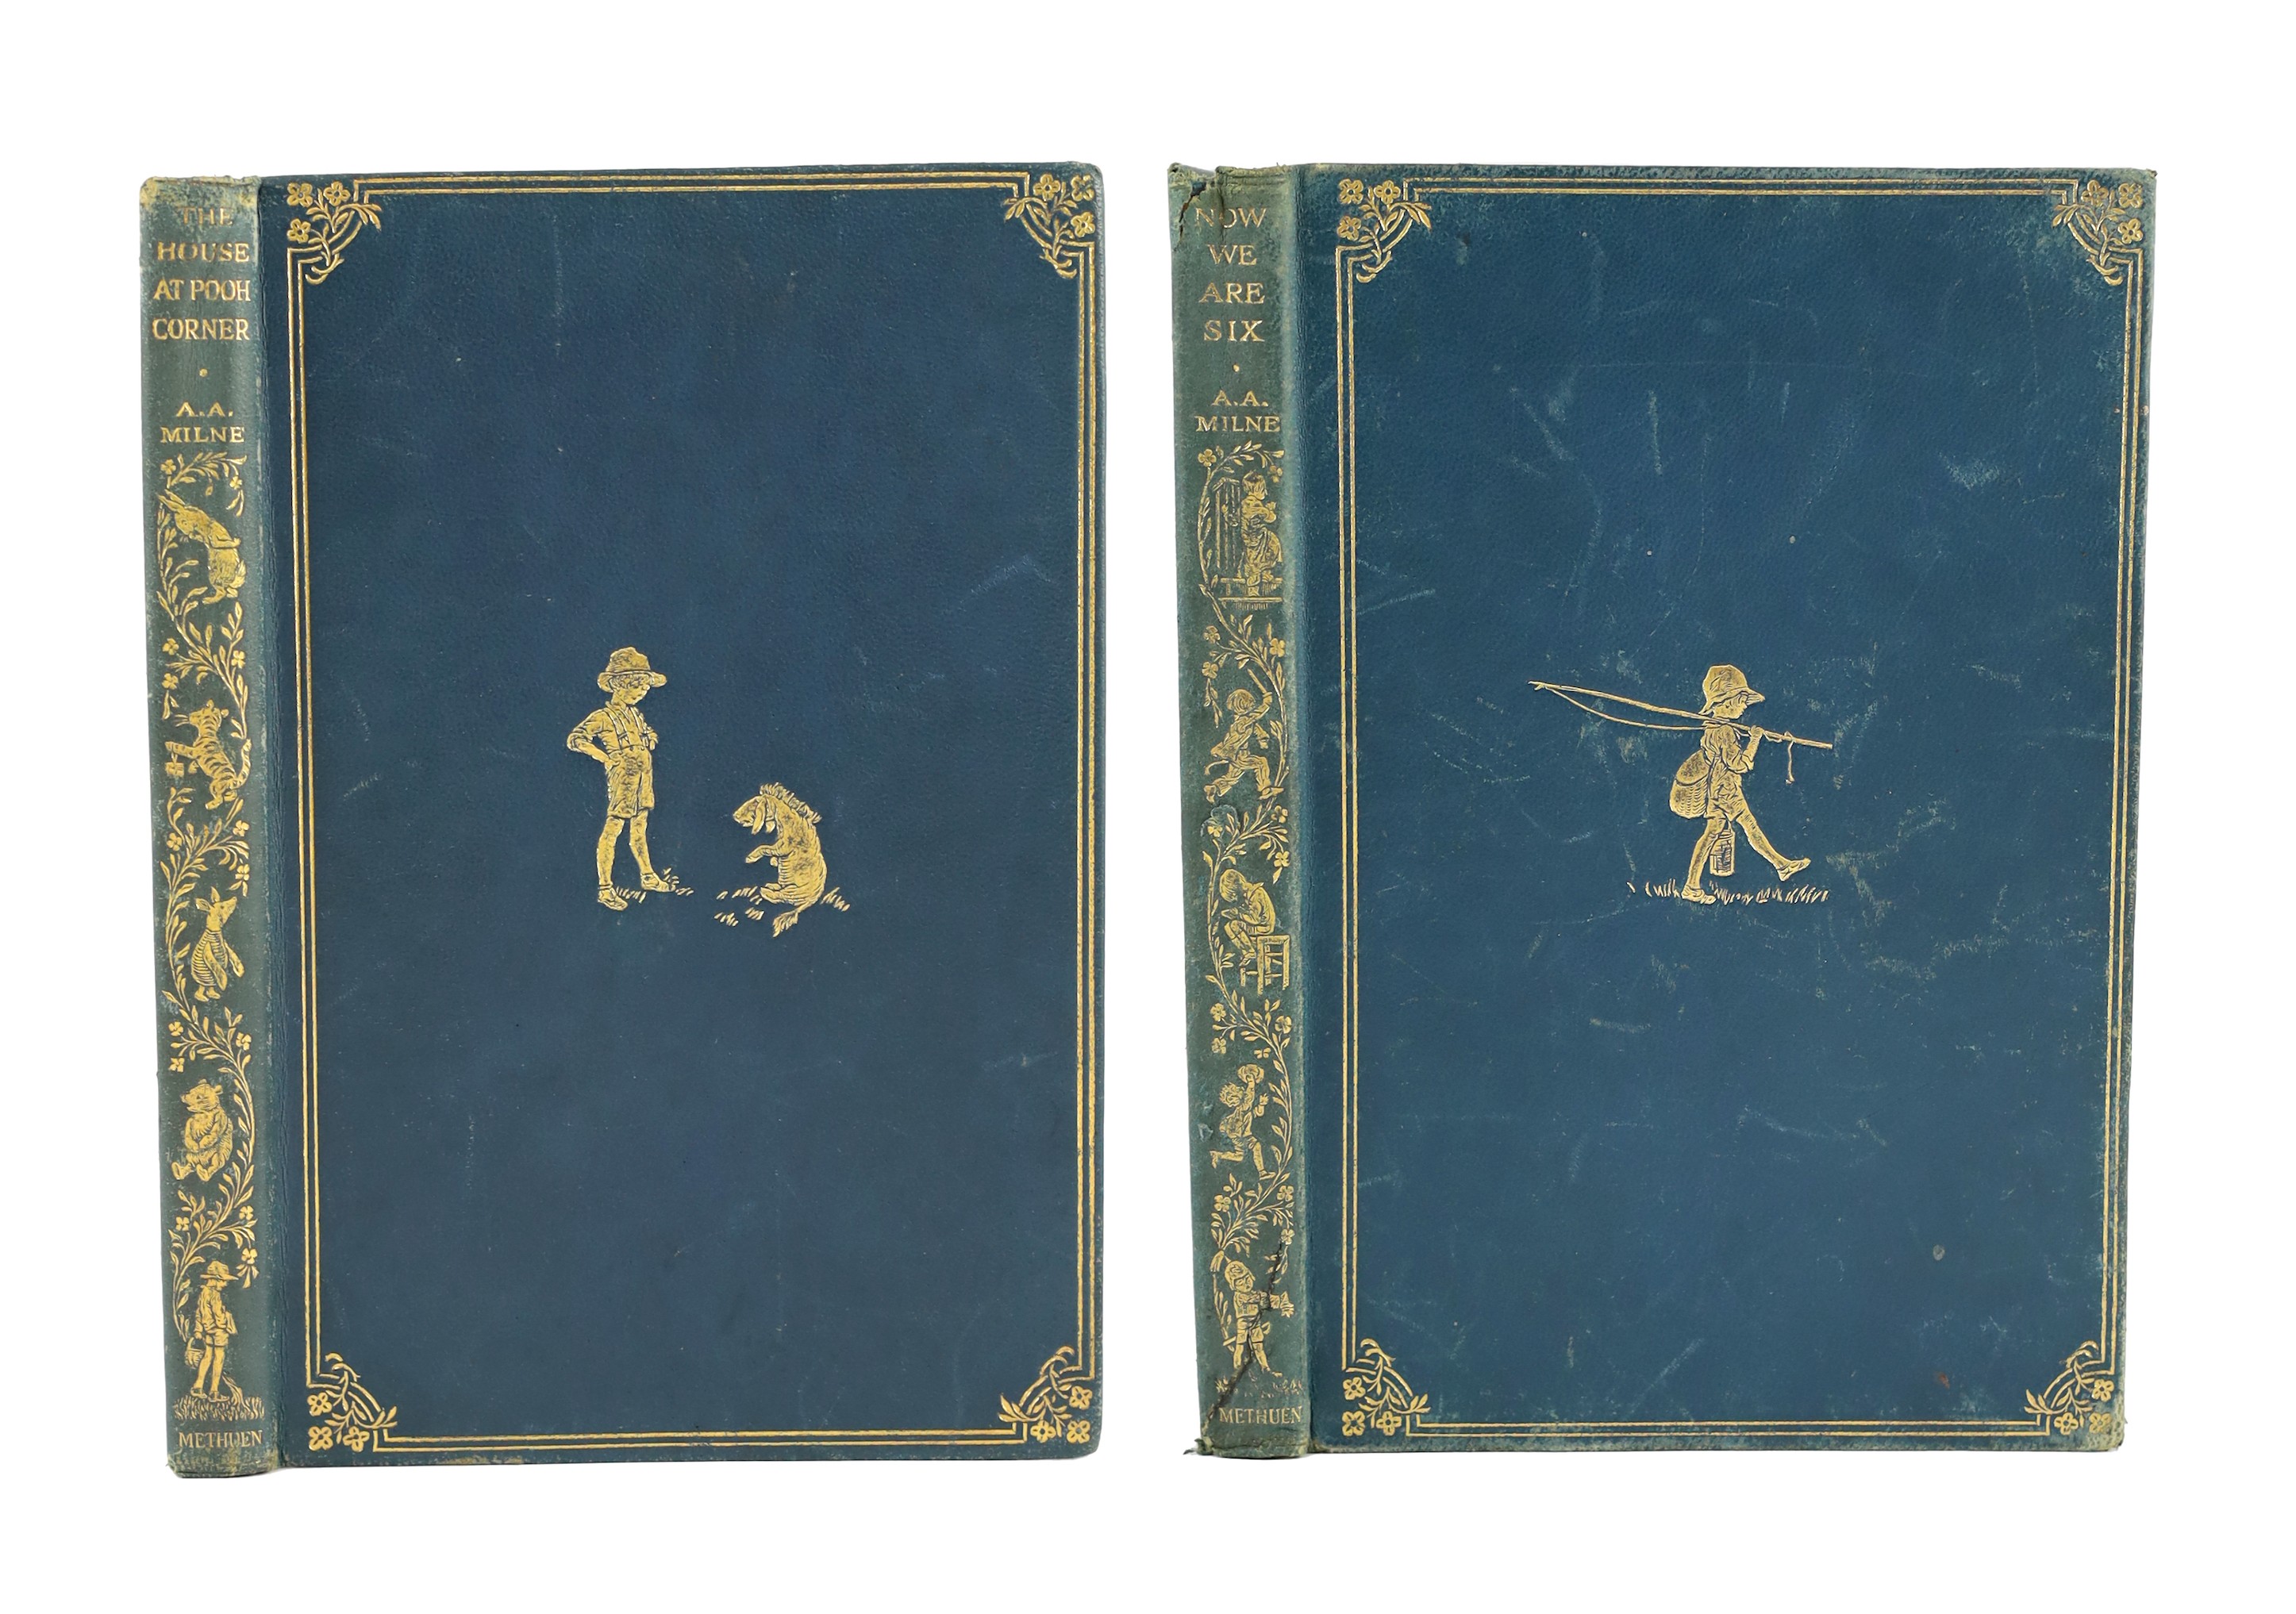 Milne, A.A. - Now We Are Six. First edition, illus. throughout (by Ernest Shepard, some full-page), half title, together with - The House at Pooh Corner. First edition. (illus. etc. as before); royal blue gilt decorated